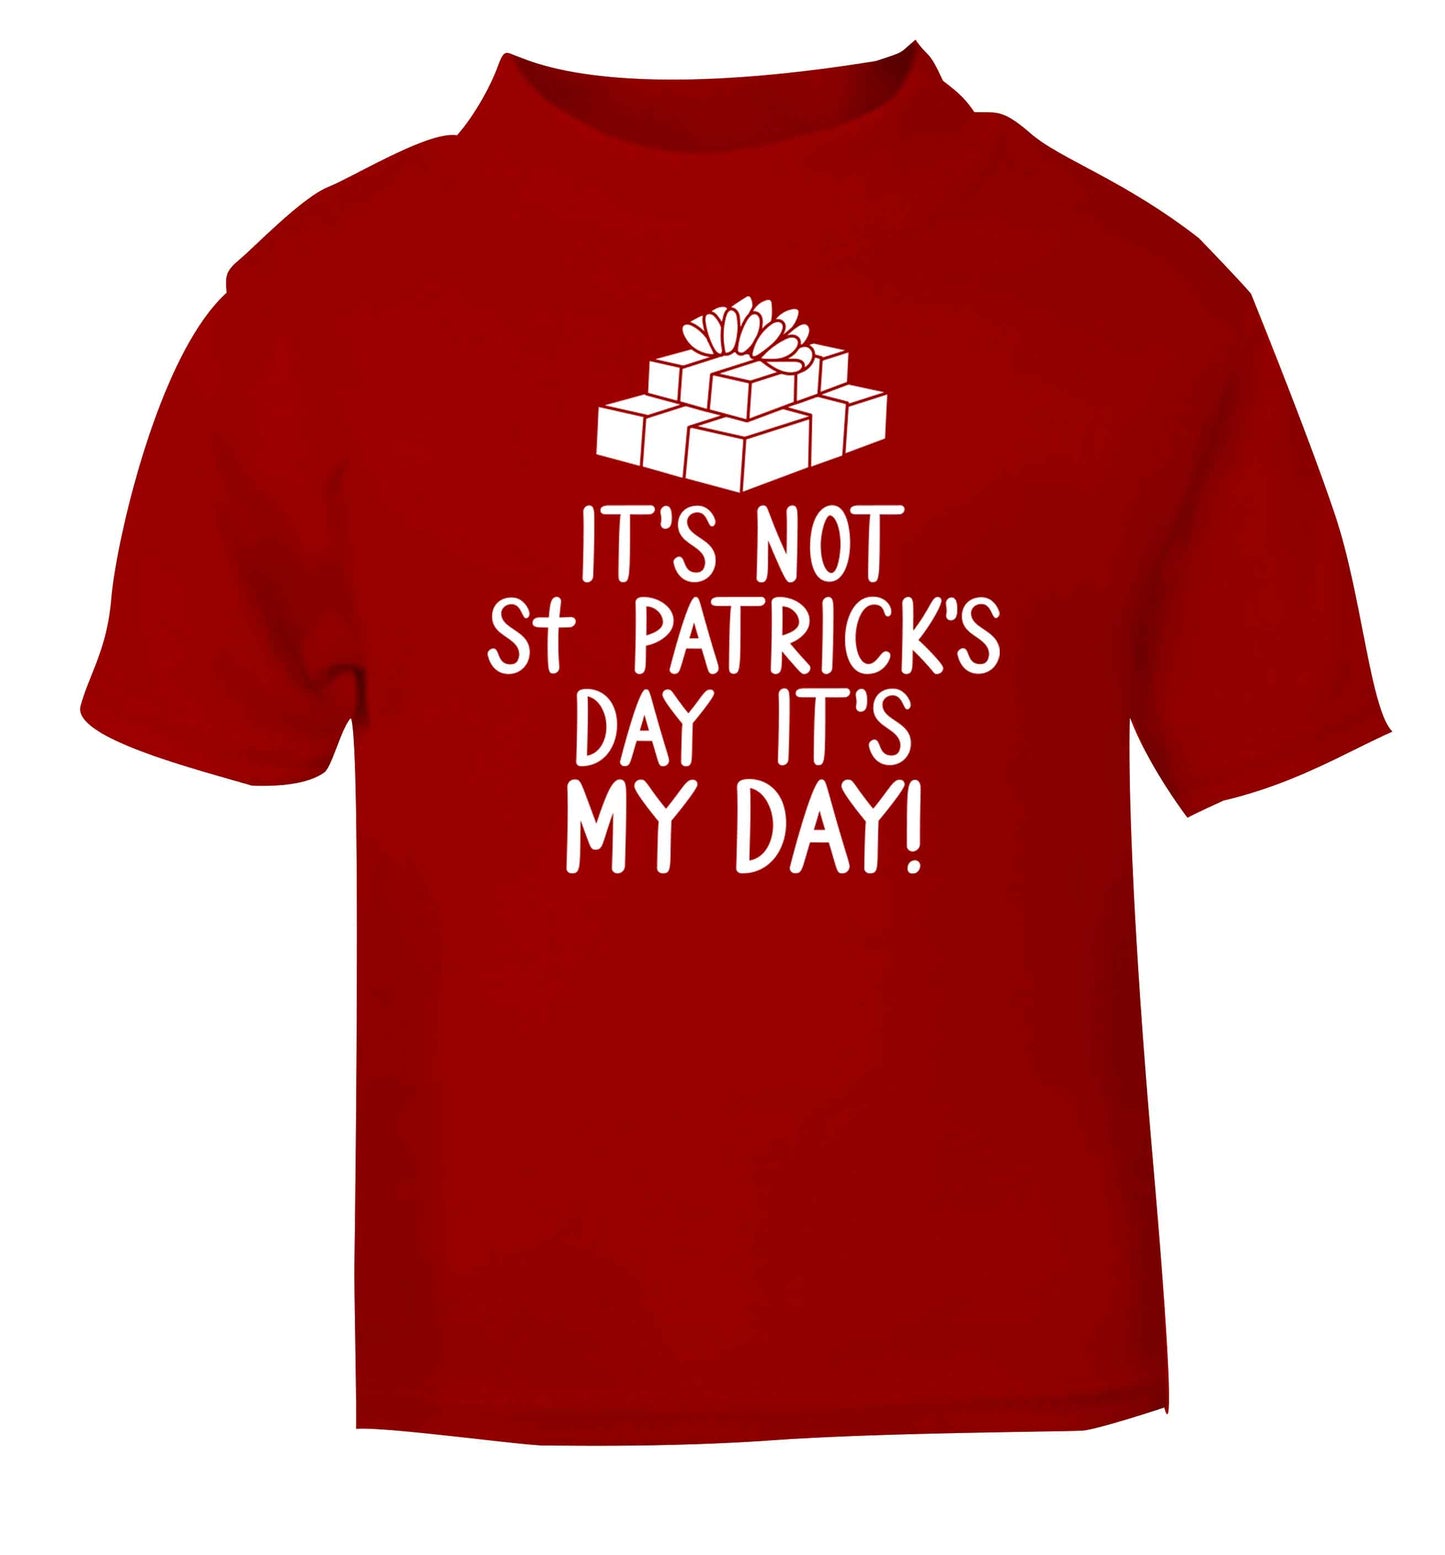 Funny gifts for your mum on mother's dayor her birthday! It's not St Patricks day it's my day red baby toddler Tshirt 2 Years